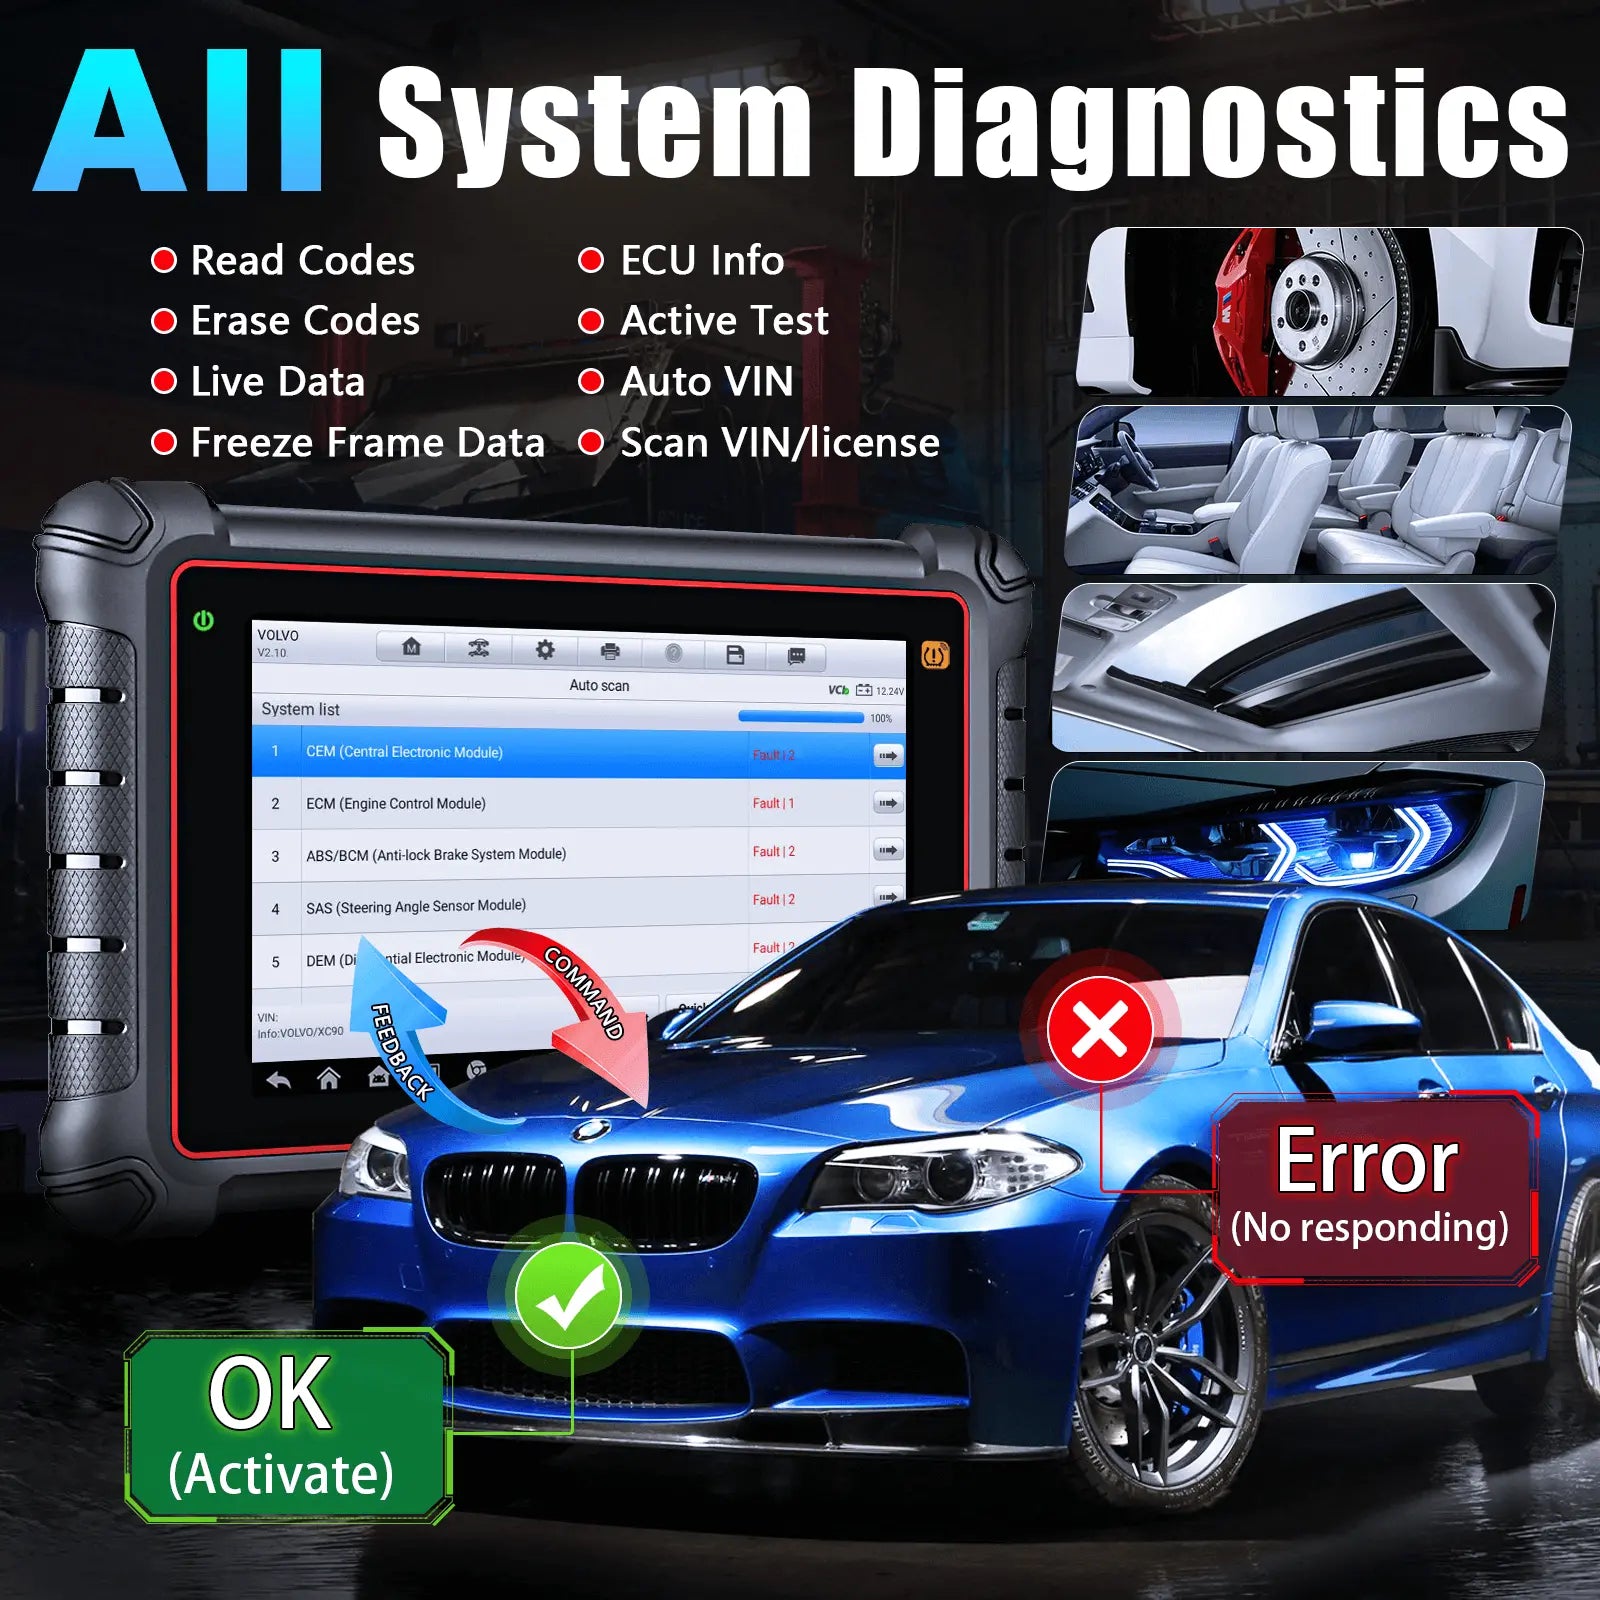 All system diagnostics for vehicle  of Autel maxipro mp900ts car scanner